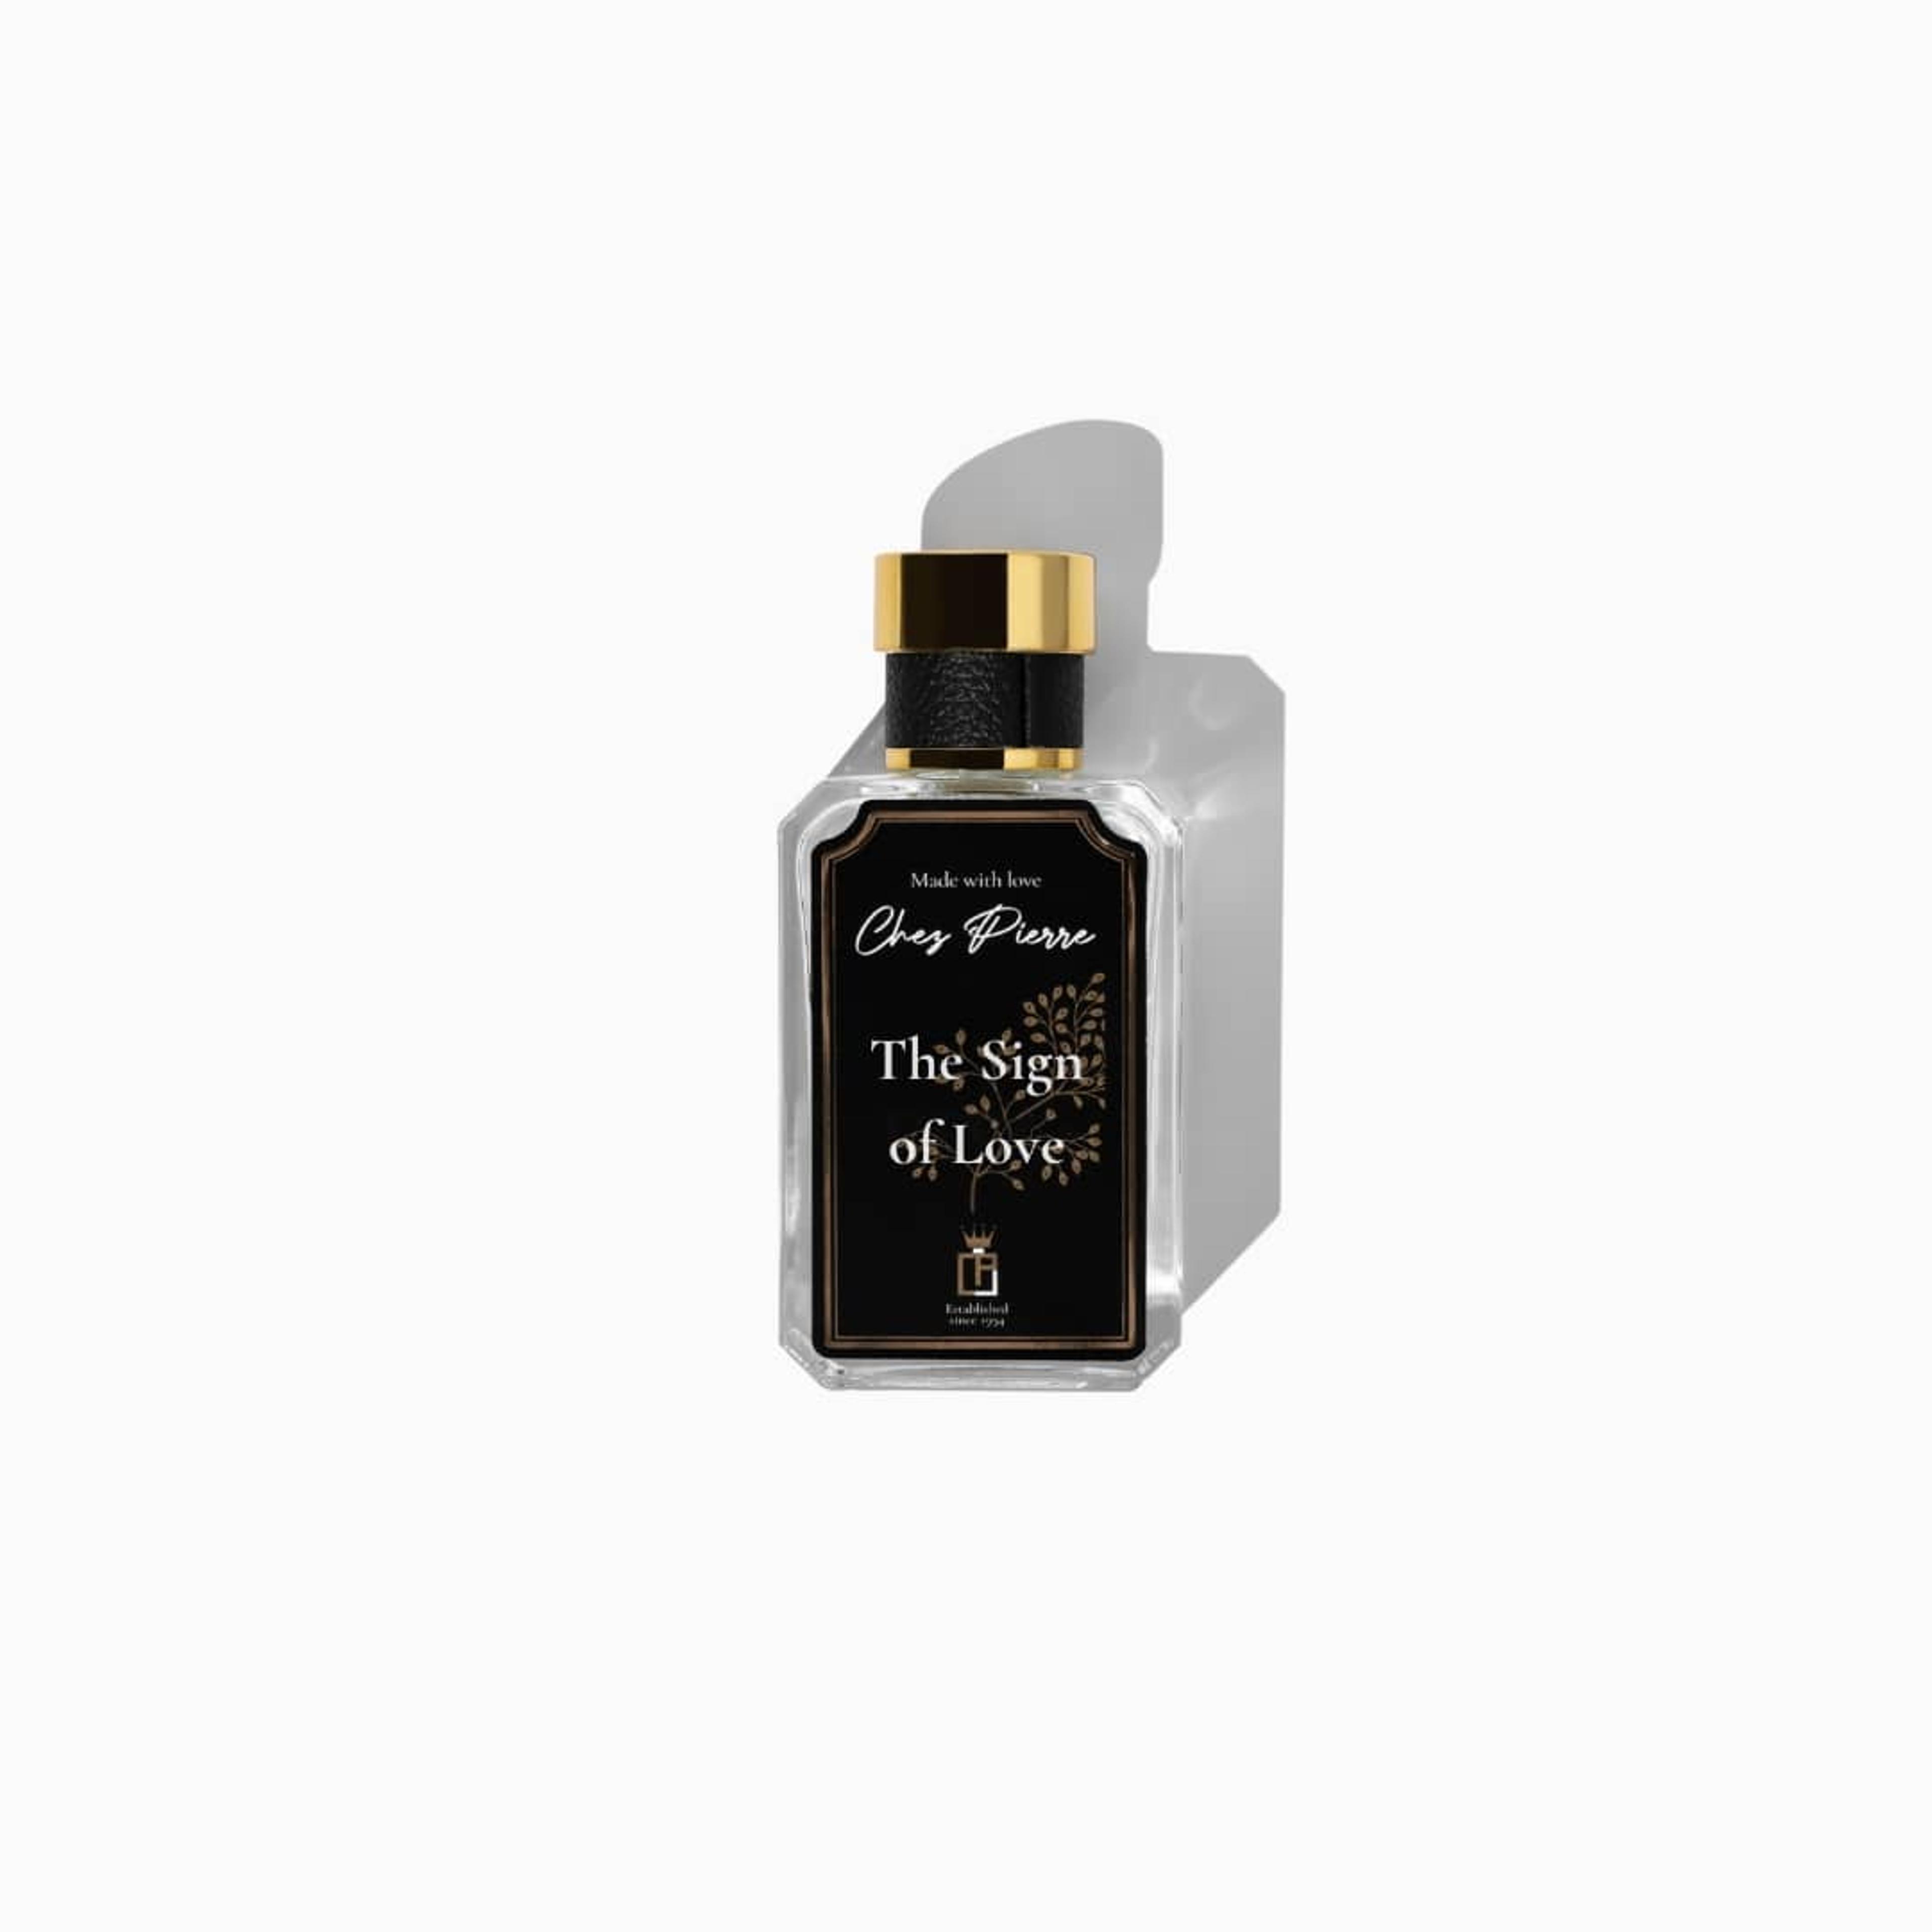 Chez Pierre's The Sign of Love Perfume Inspired By Poison Girl